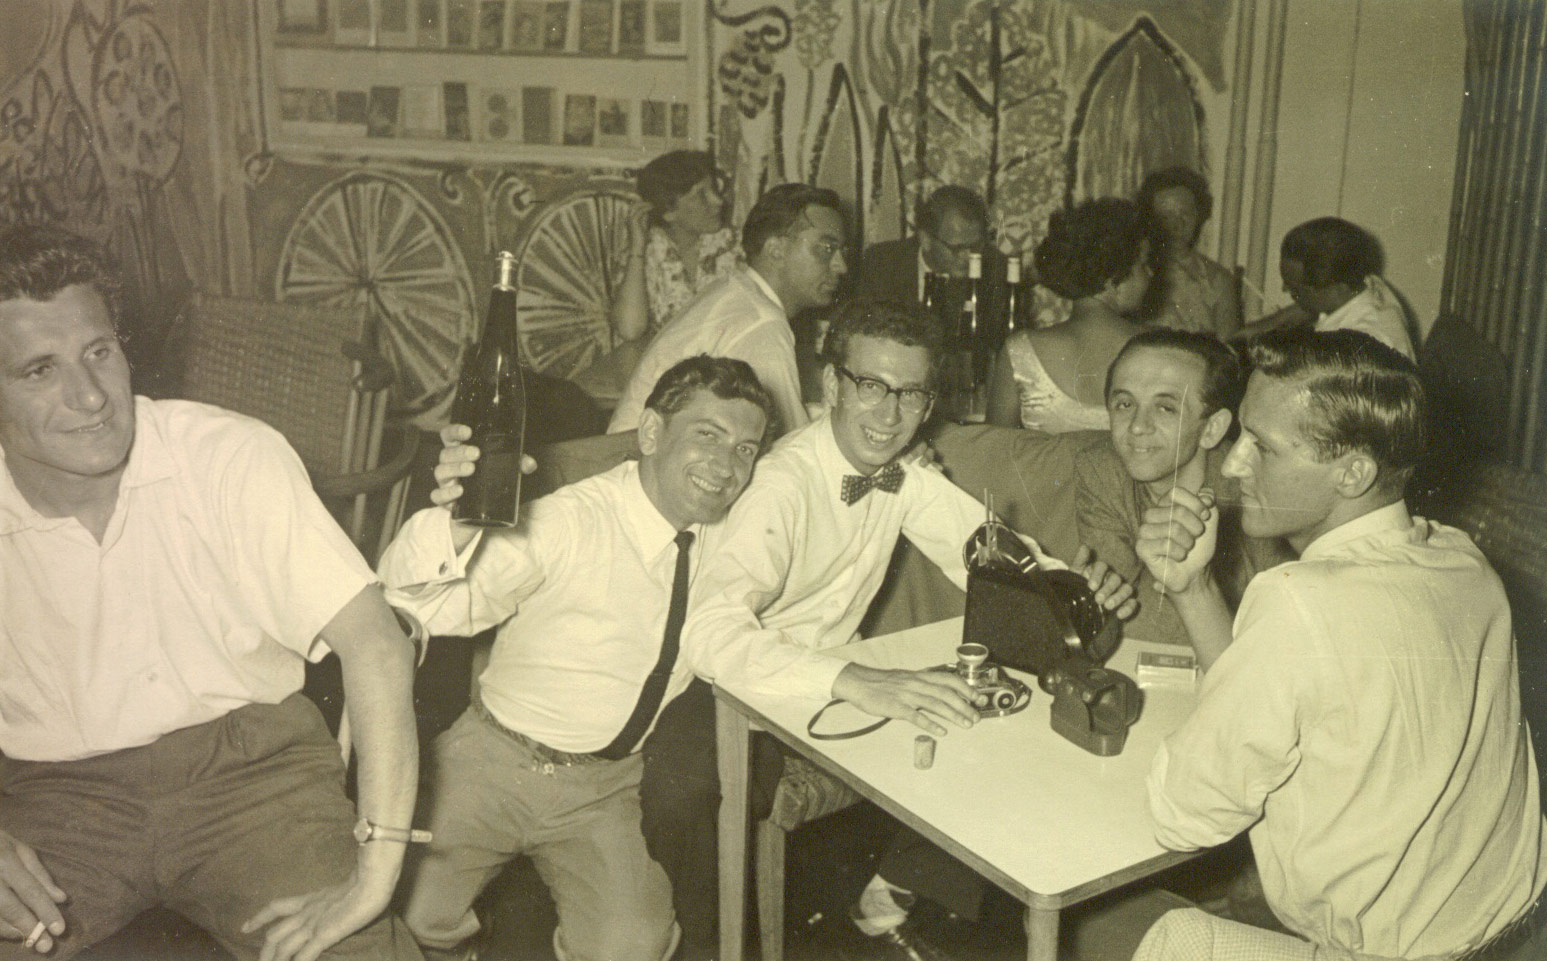 JYM students at a student party held at the Türkenstraße dormitory.  Pictured are JYM students Fred Kauffman, second from left and Ken Kurze, front right, with their German friends